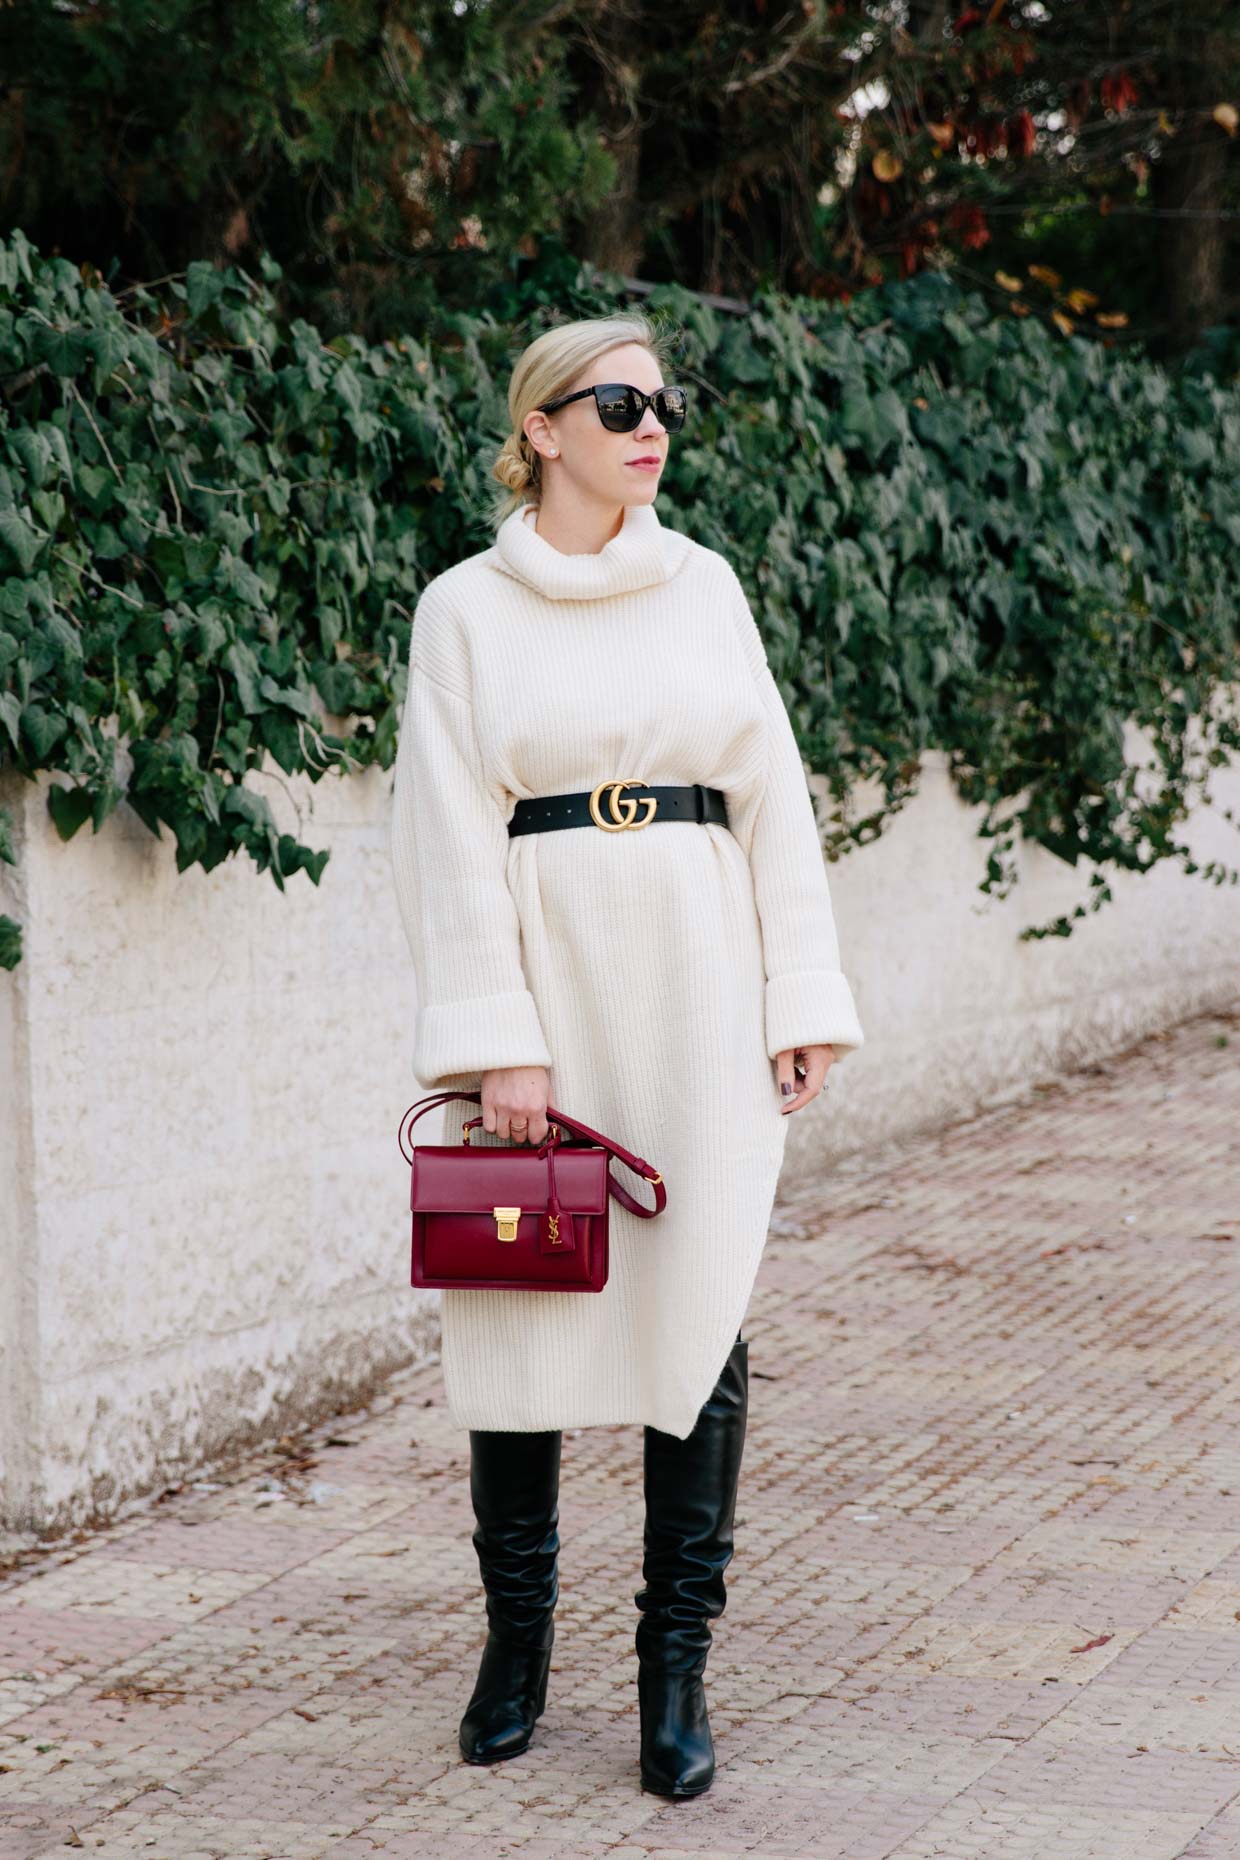 Meagan Brandon fashion blogger wearing olive utility duster jacket with  Gucci Marmont belt and Valentino Rockstud pumps, black and gold buckle  Gucci belt outfit - Meagan's Moda